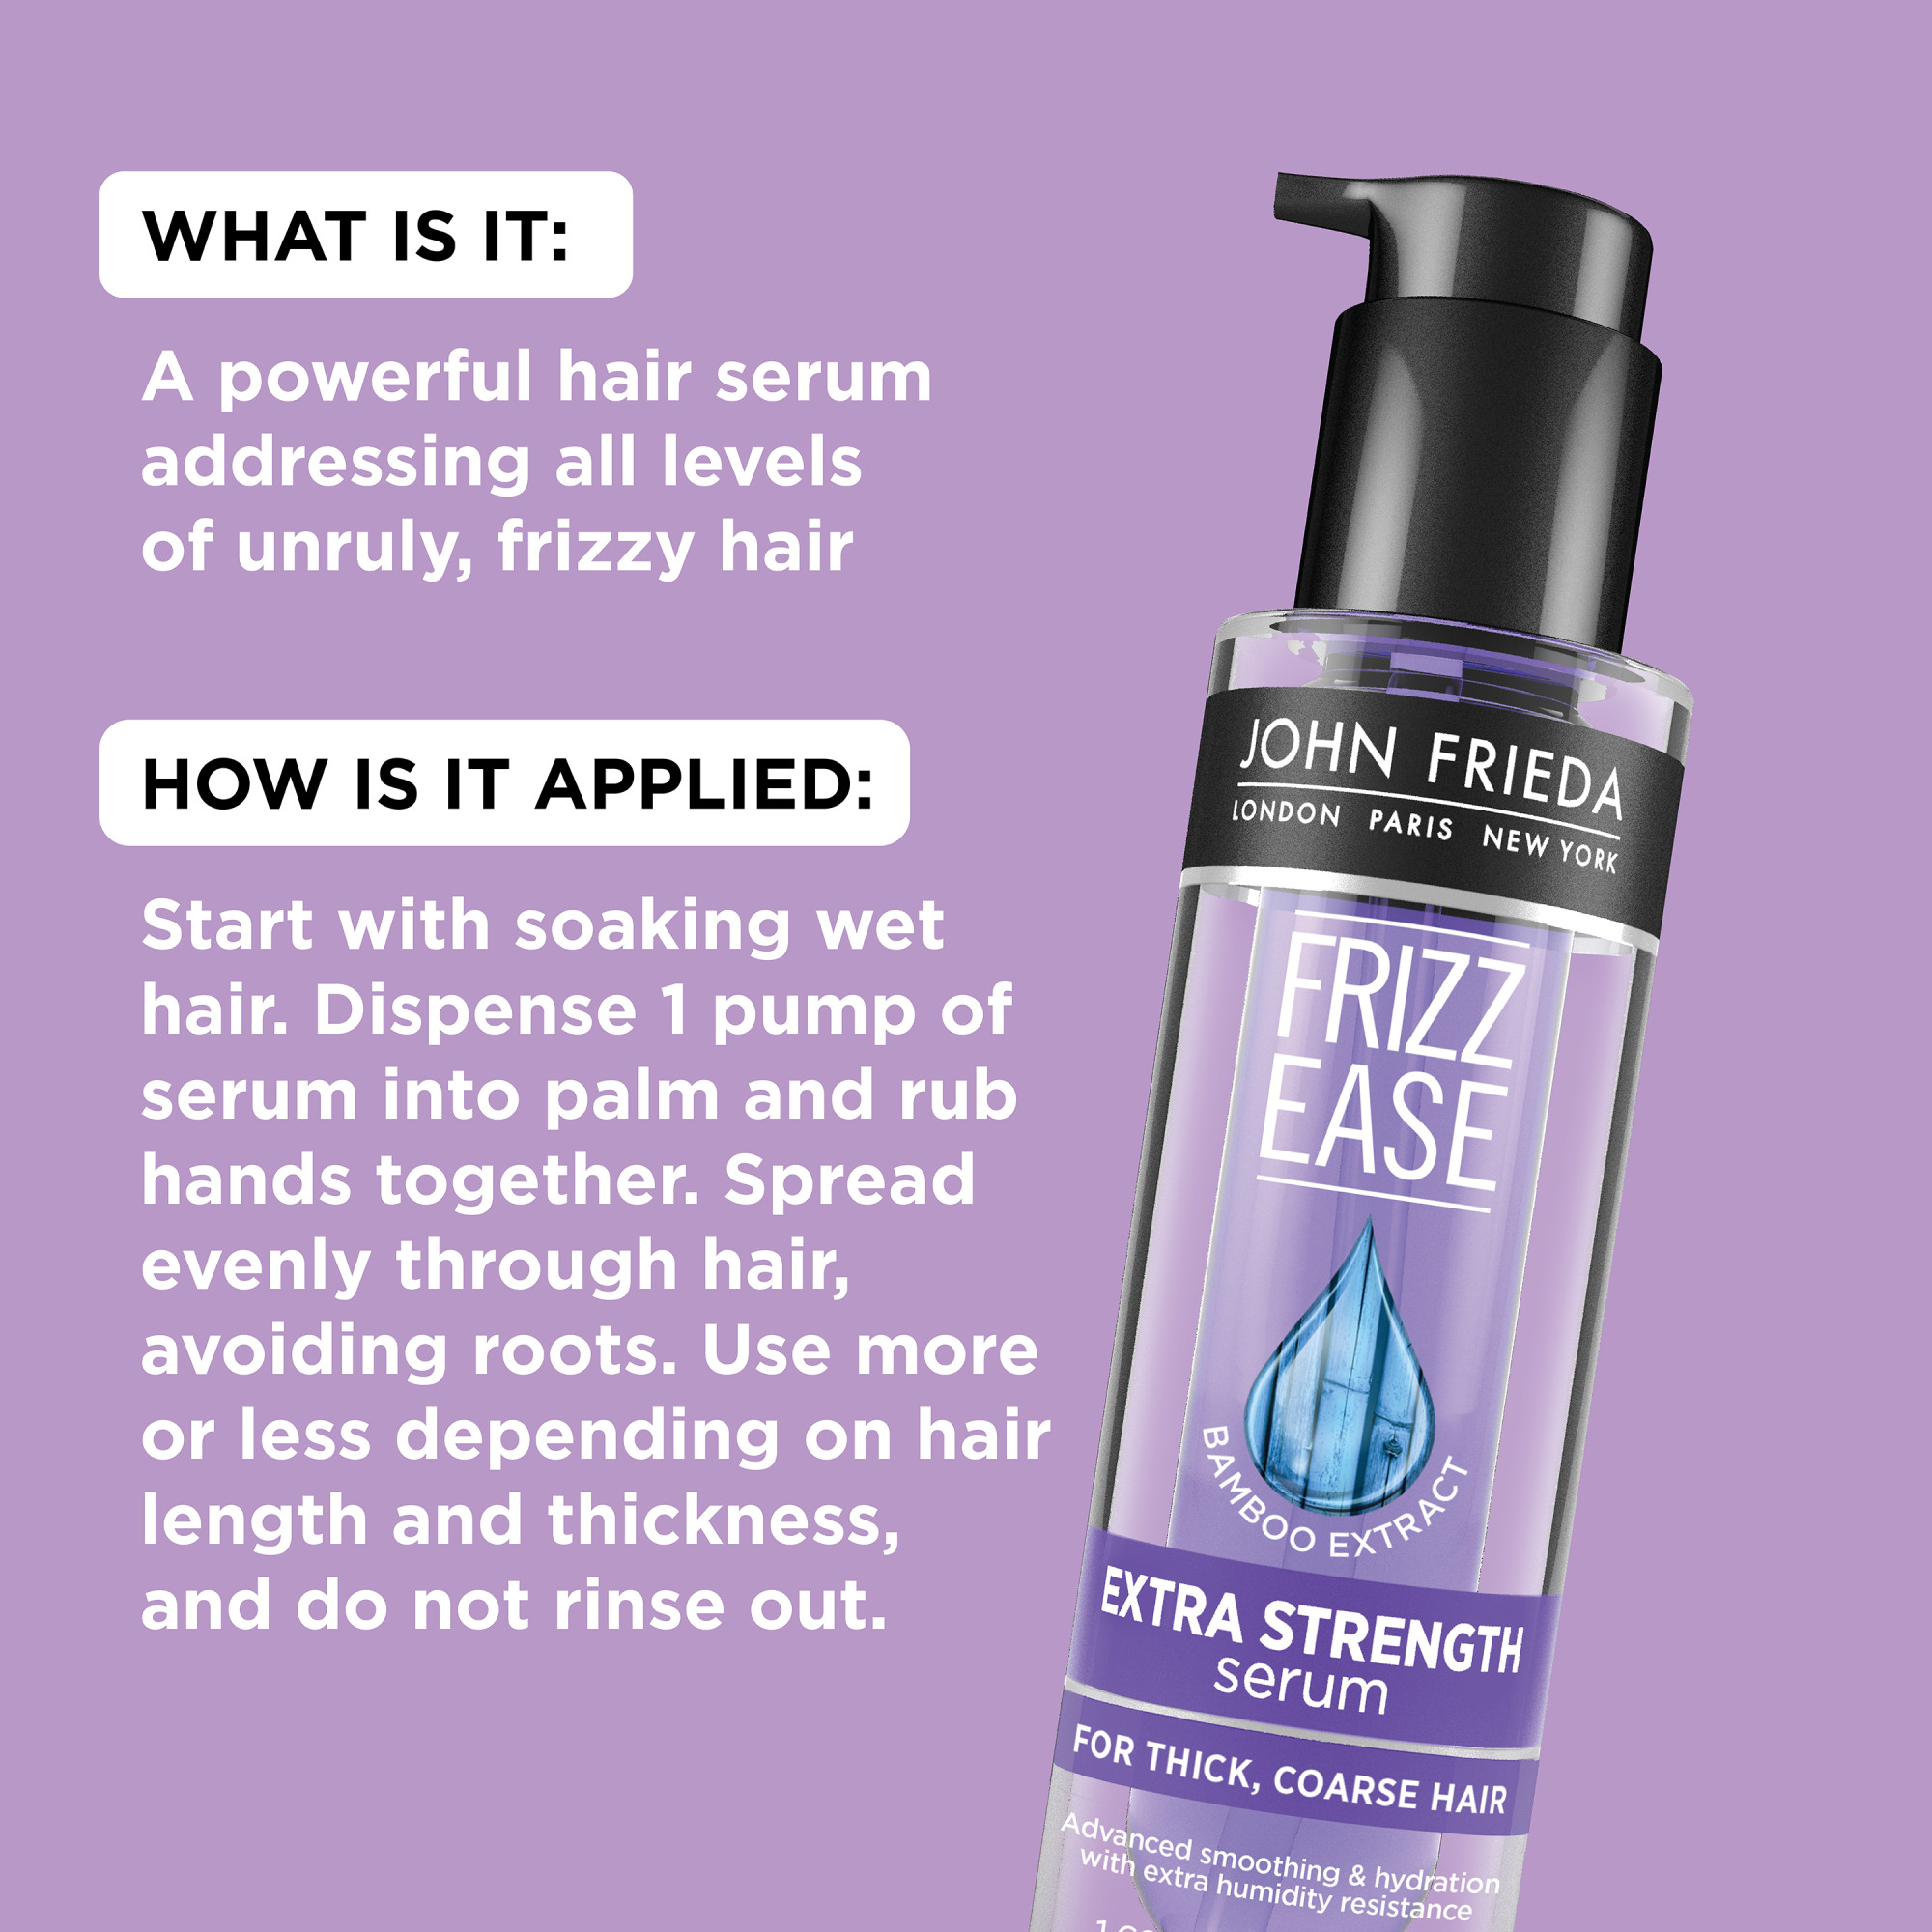 Frizz Ease Extra Strength Hair Serum - image 3 of 5